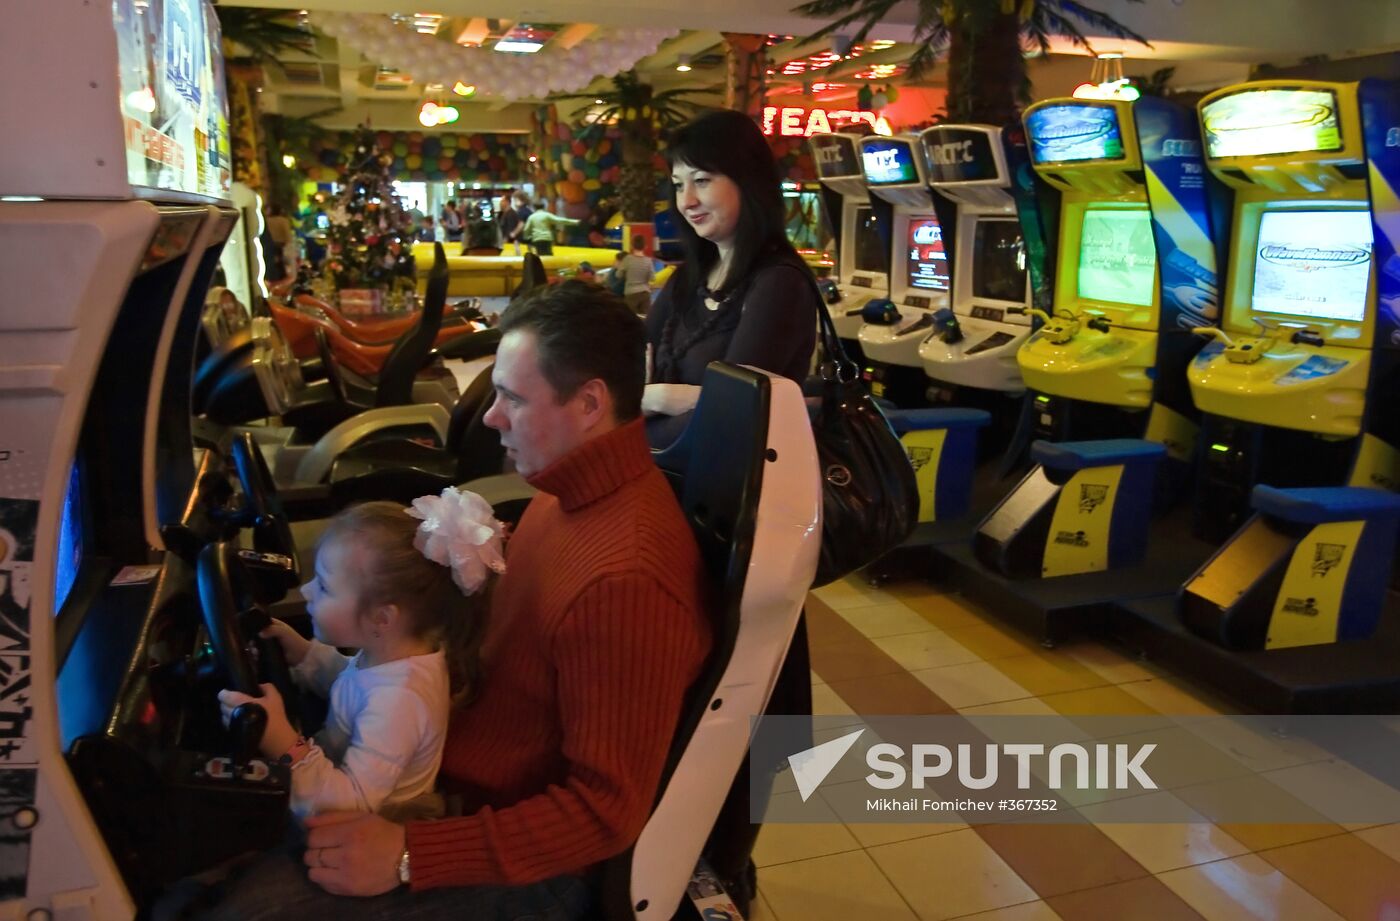 Family entertainment center Fantasy Park opens in Moscow